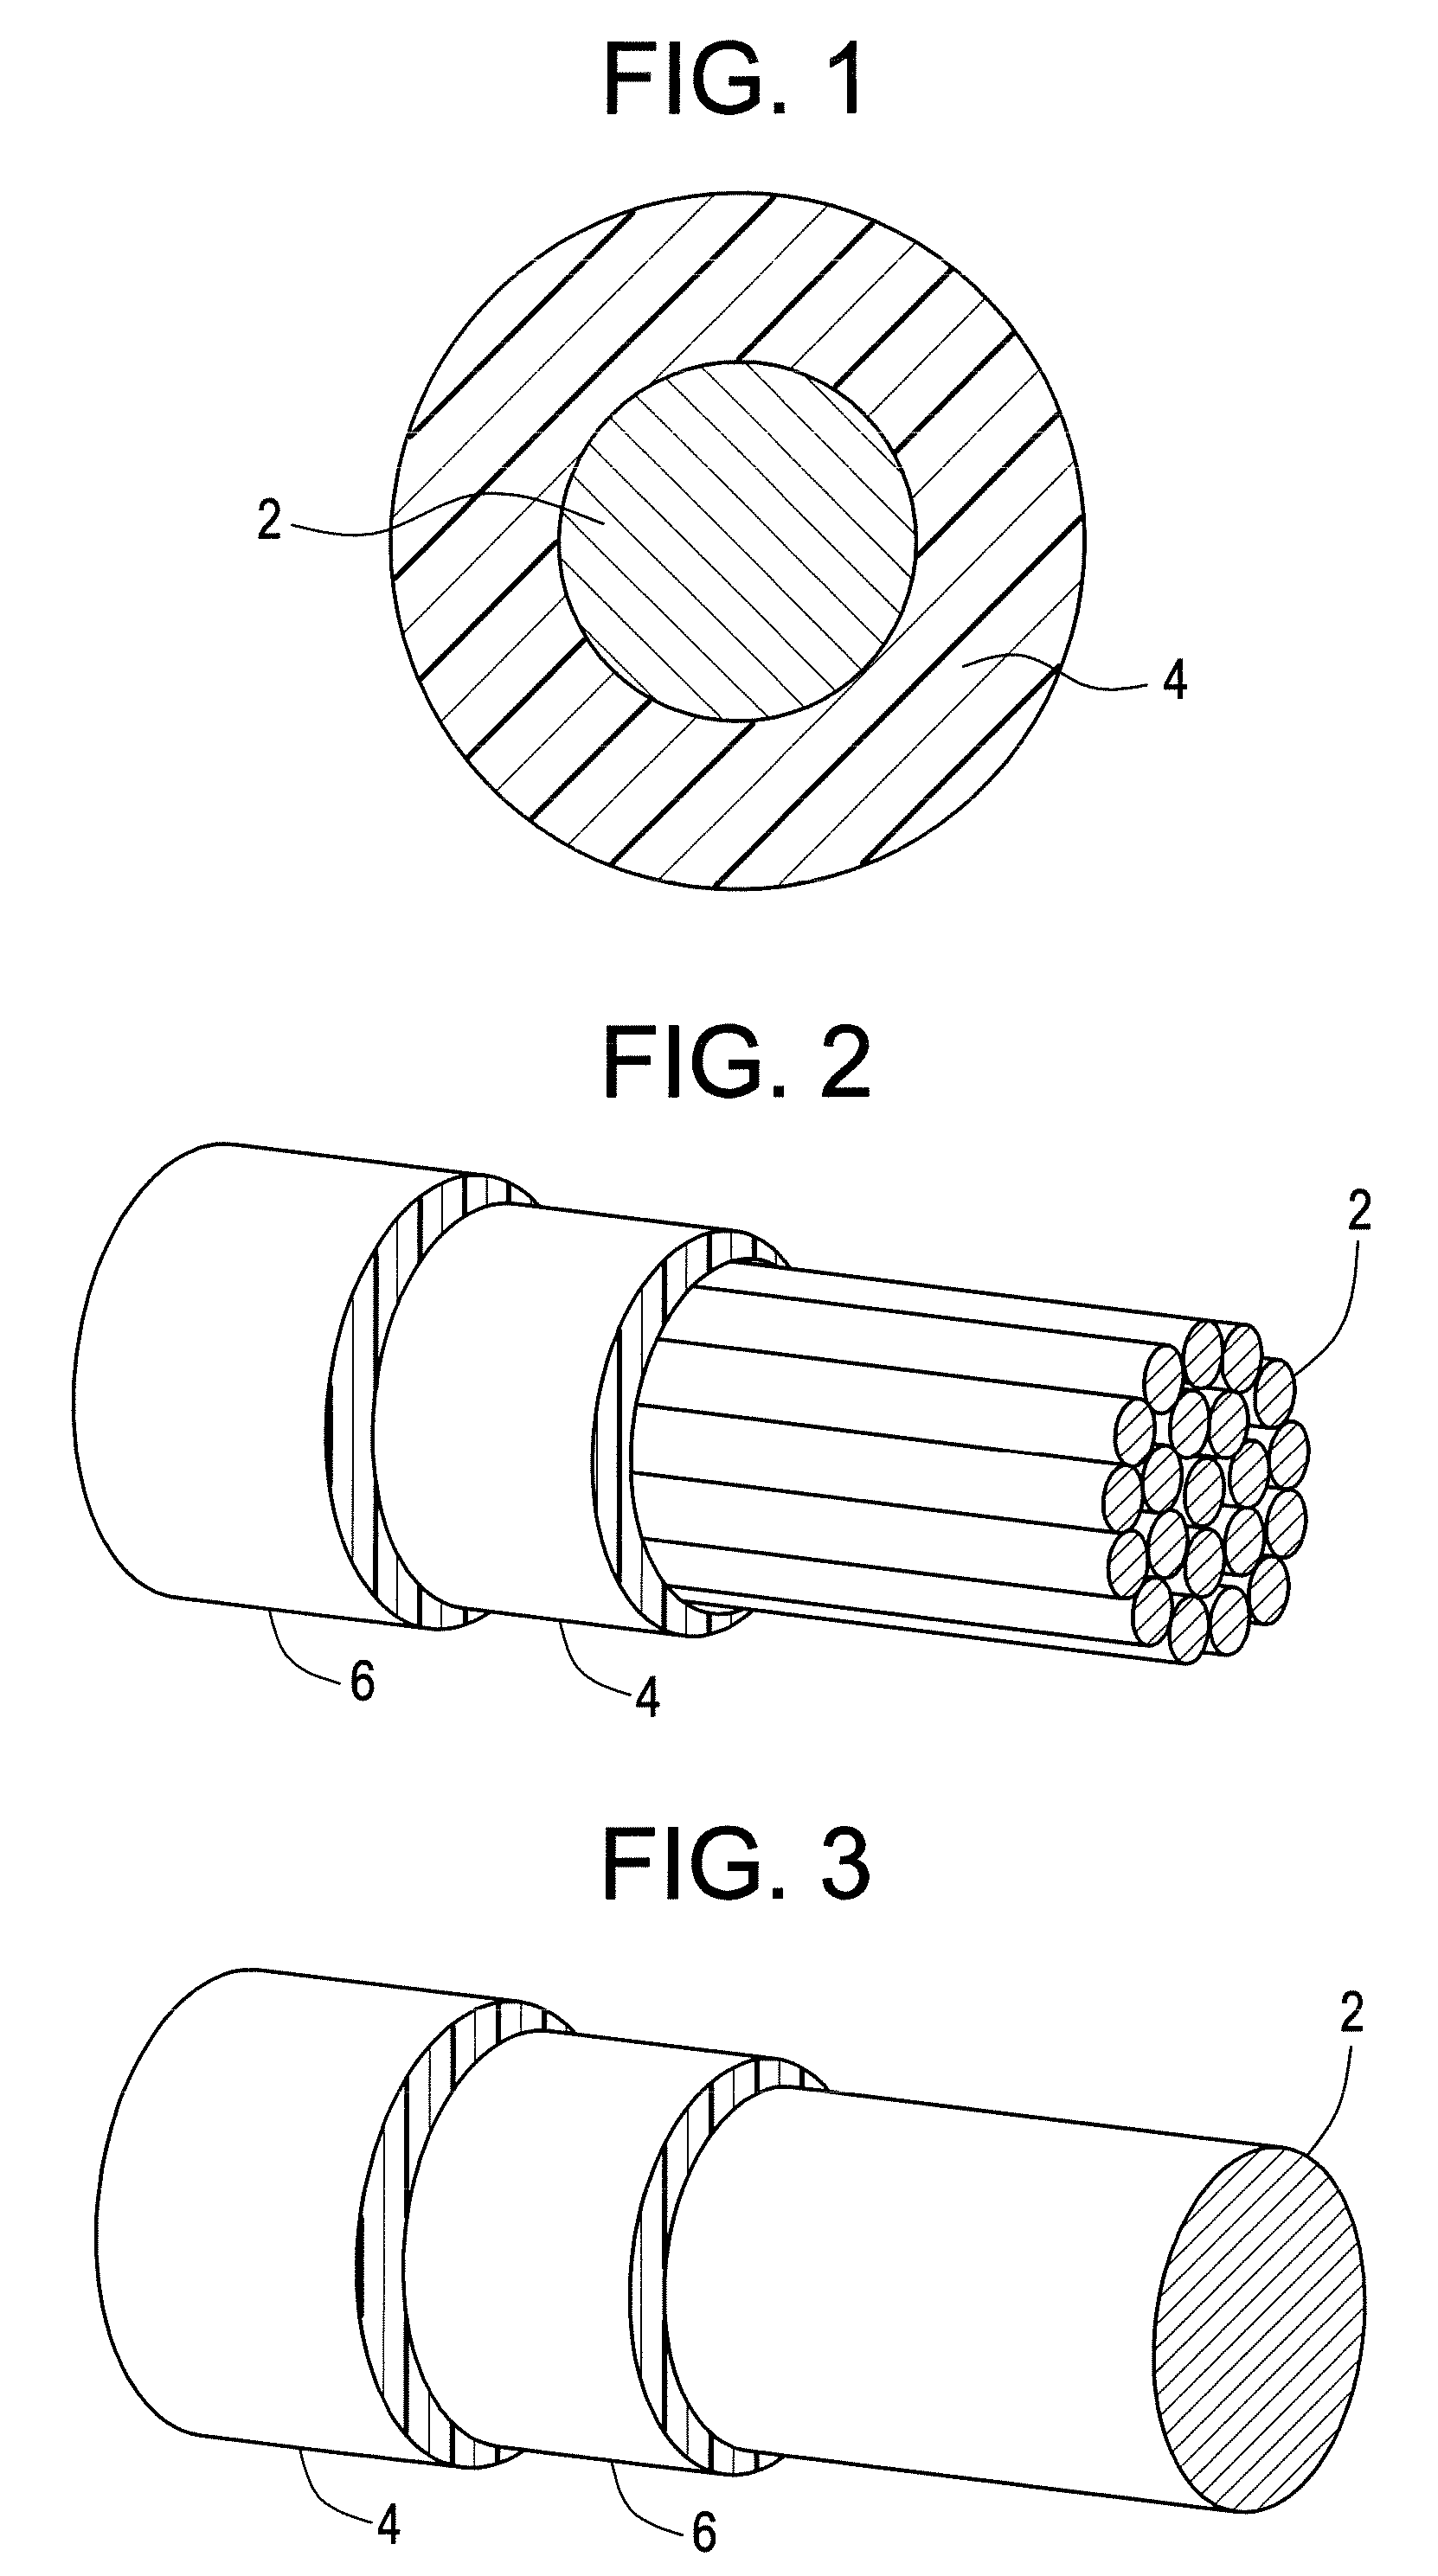 Flame retardant flexible thermoplastic composition, method of making, and articles thereof